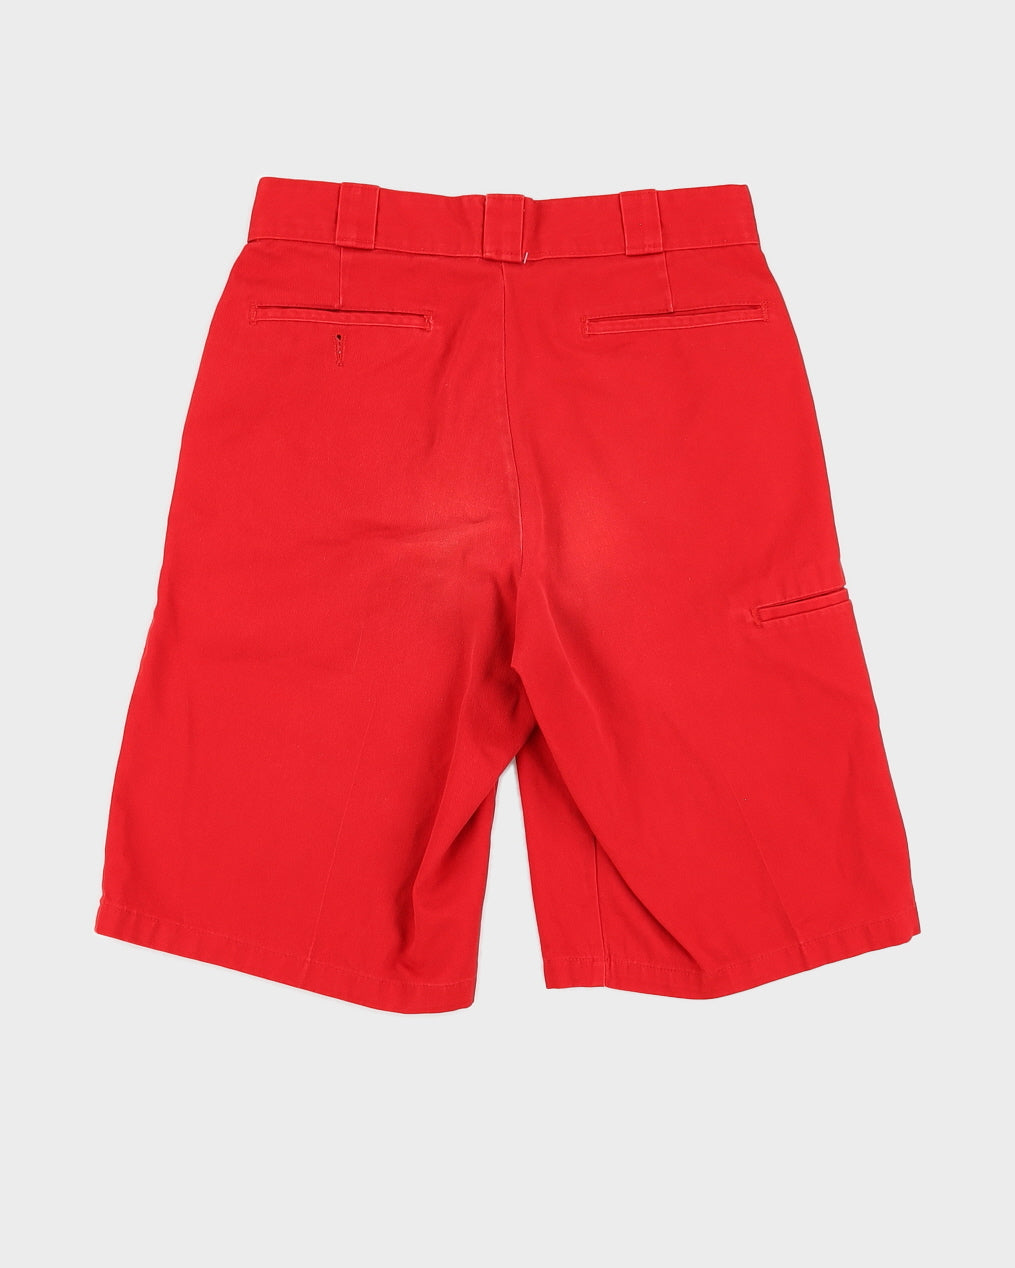 Dickies Red Loose Fit Shorts - W32